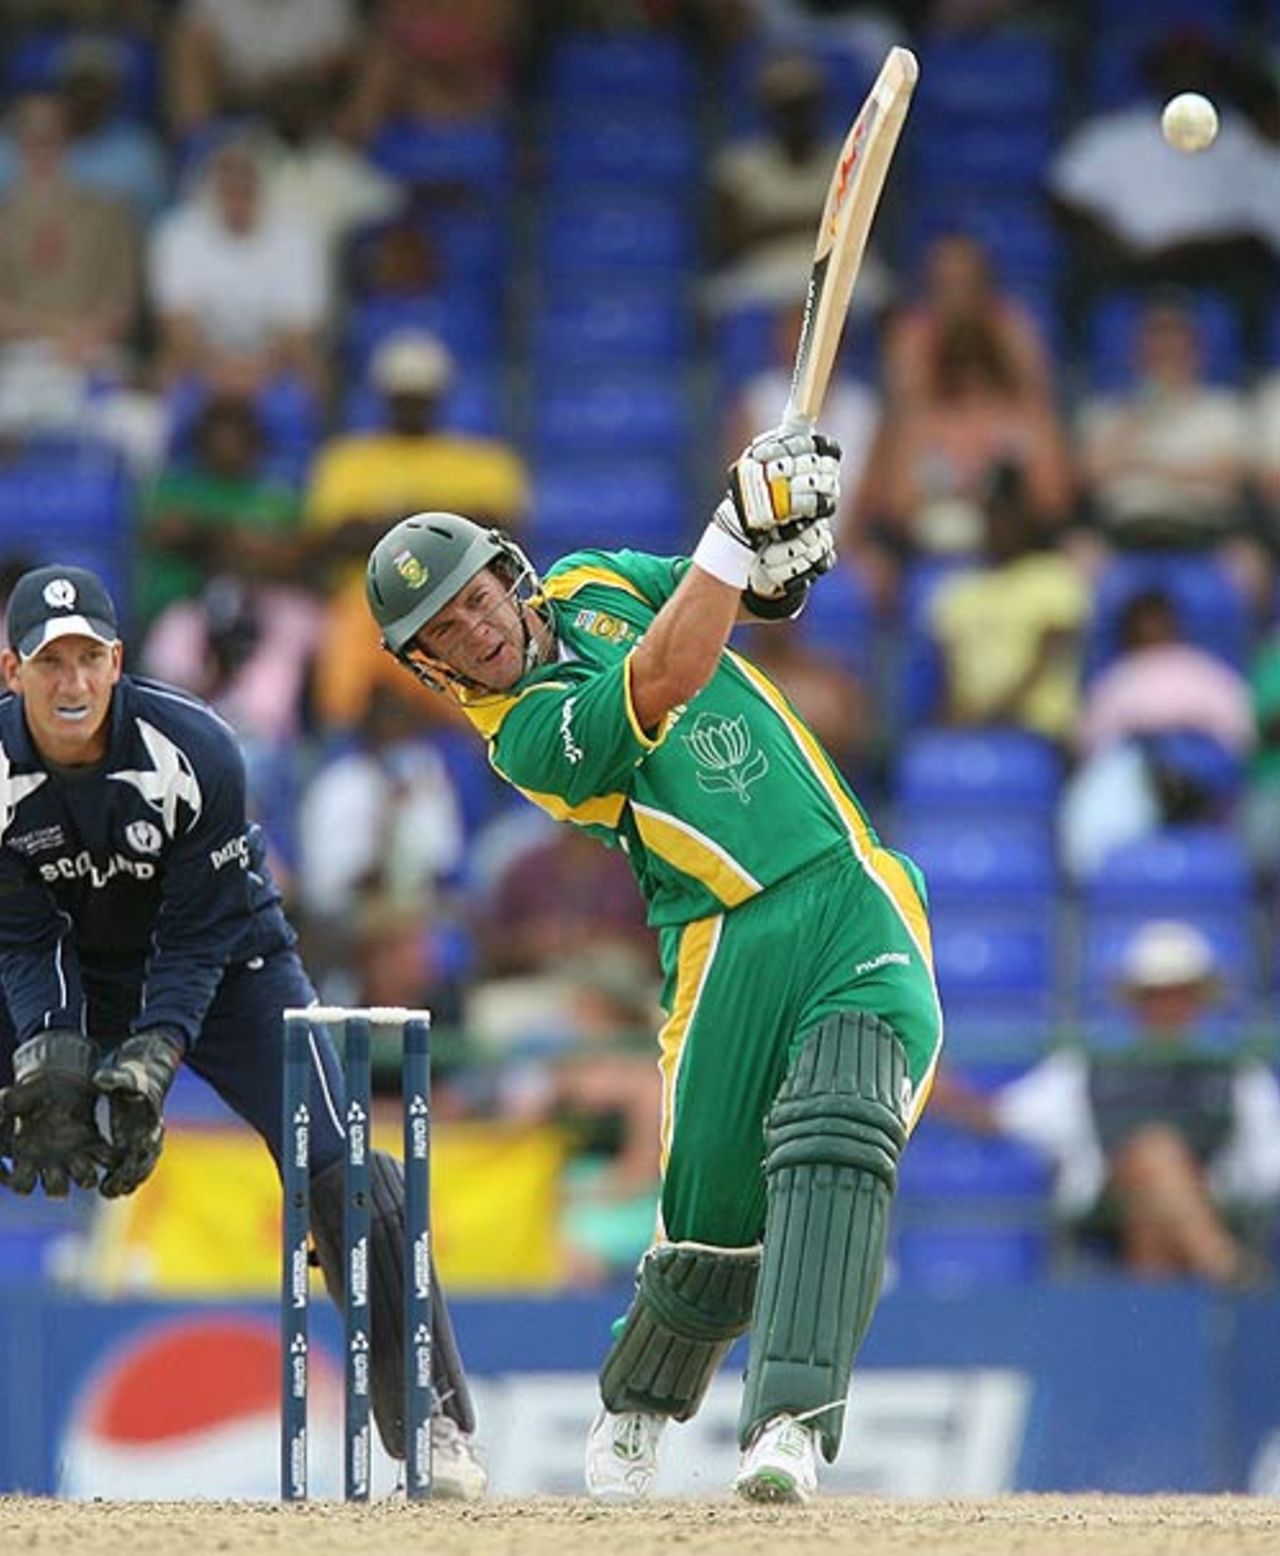 AB de Villiers struck two sixes during his half-century, Scotland v South Africa, Group A, St Kitts, March 20, 2007